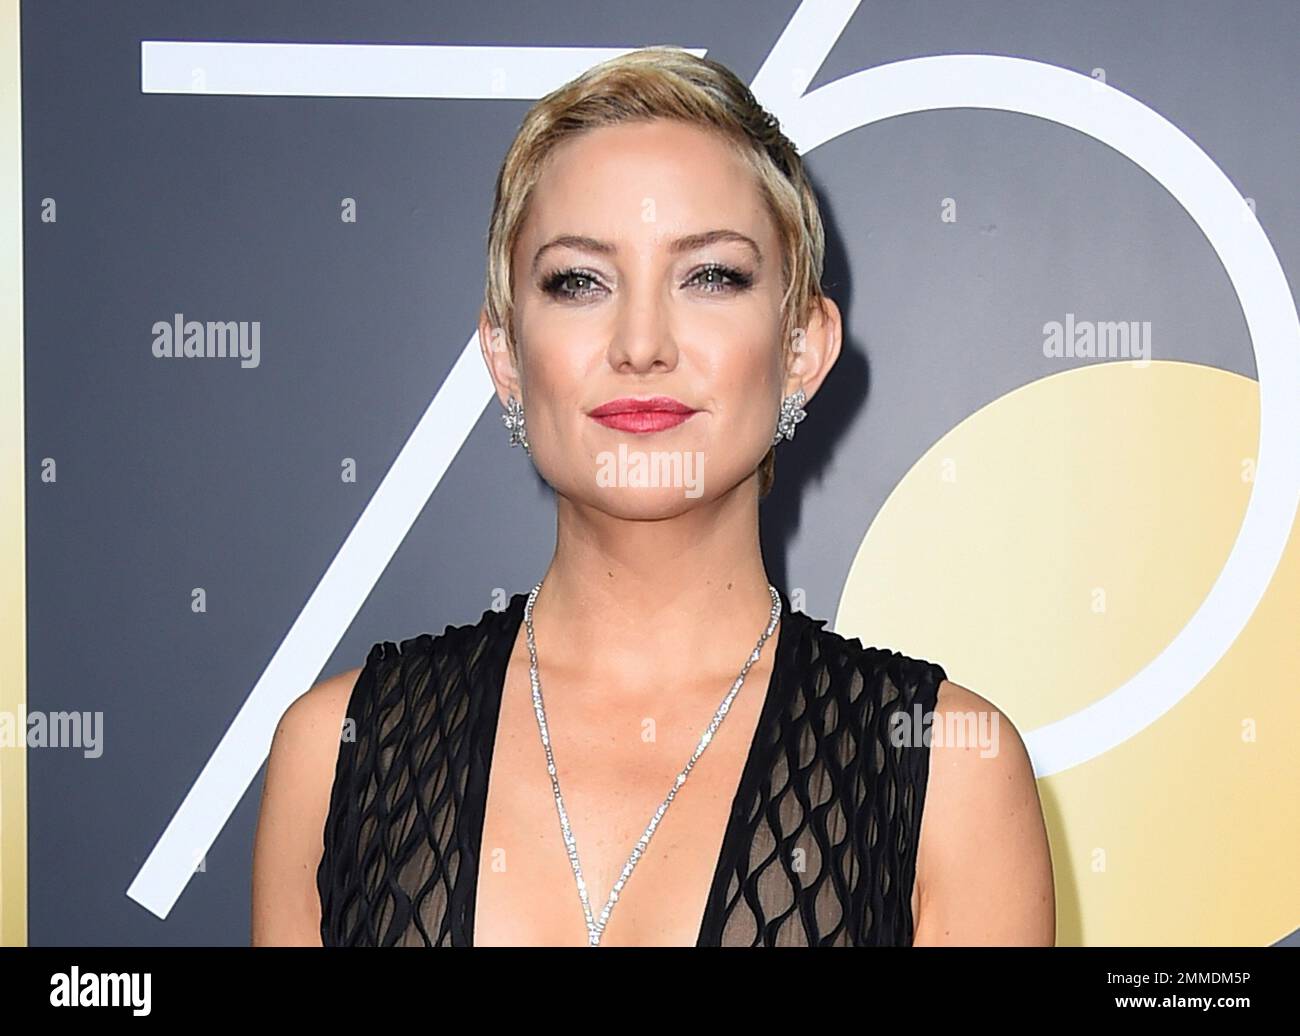 FILE - In this Jan. 7, 2018 file photo, actress Kate Hudson arrives at the  Golden Globe Awards in Beverly Hills, Calif. Hudson announced Wednesday on  her Instagram account that her daughter,